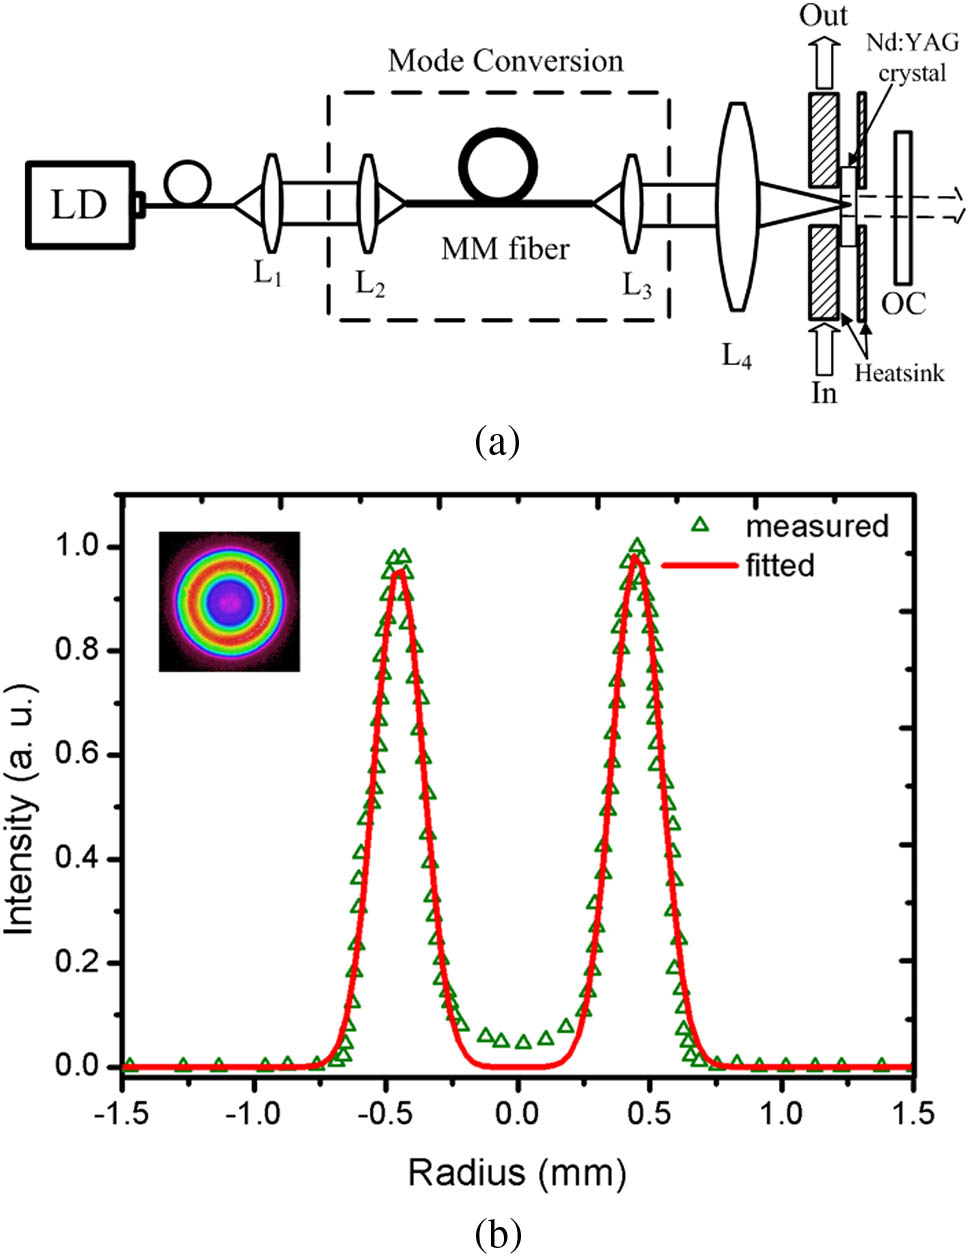 (a) Schematic diagram of CW Nd:YAG laser by using annular pumping, and (b) captured intensity distribution of pumping light at L4’s focal plane by applying 90 μm off-focus coupling.